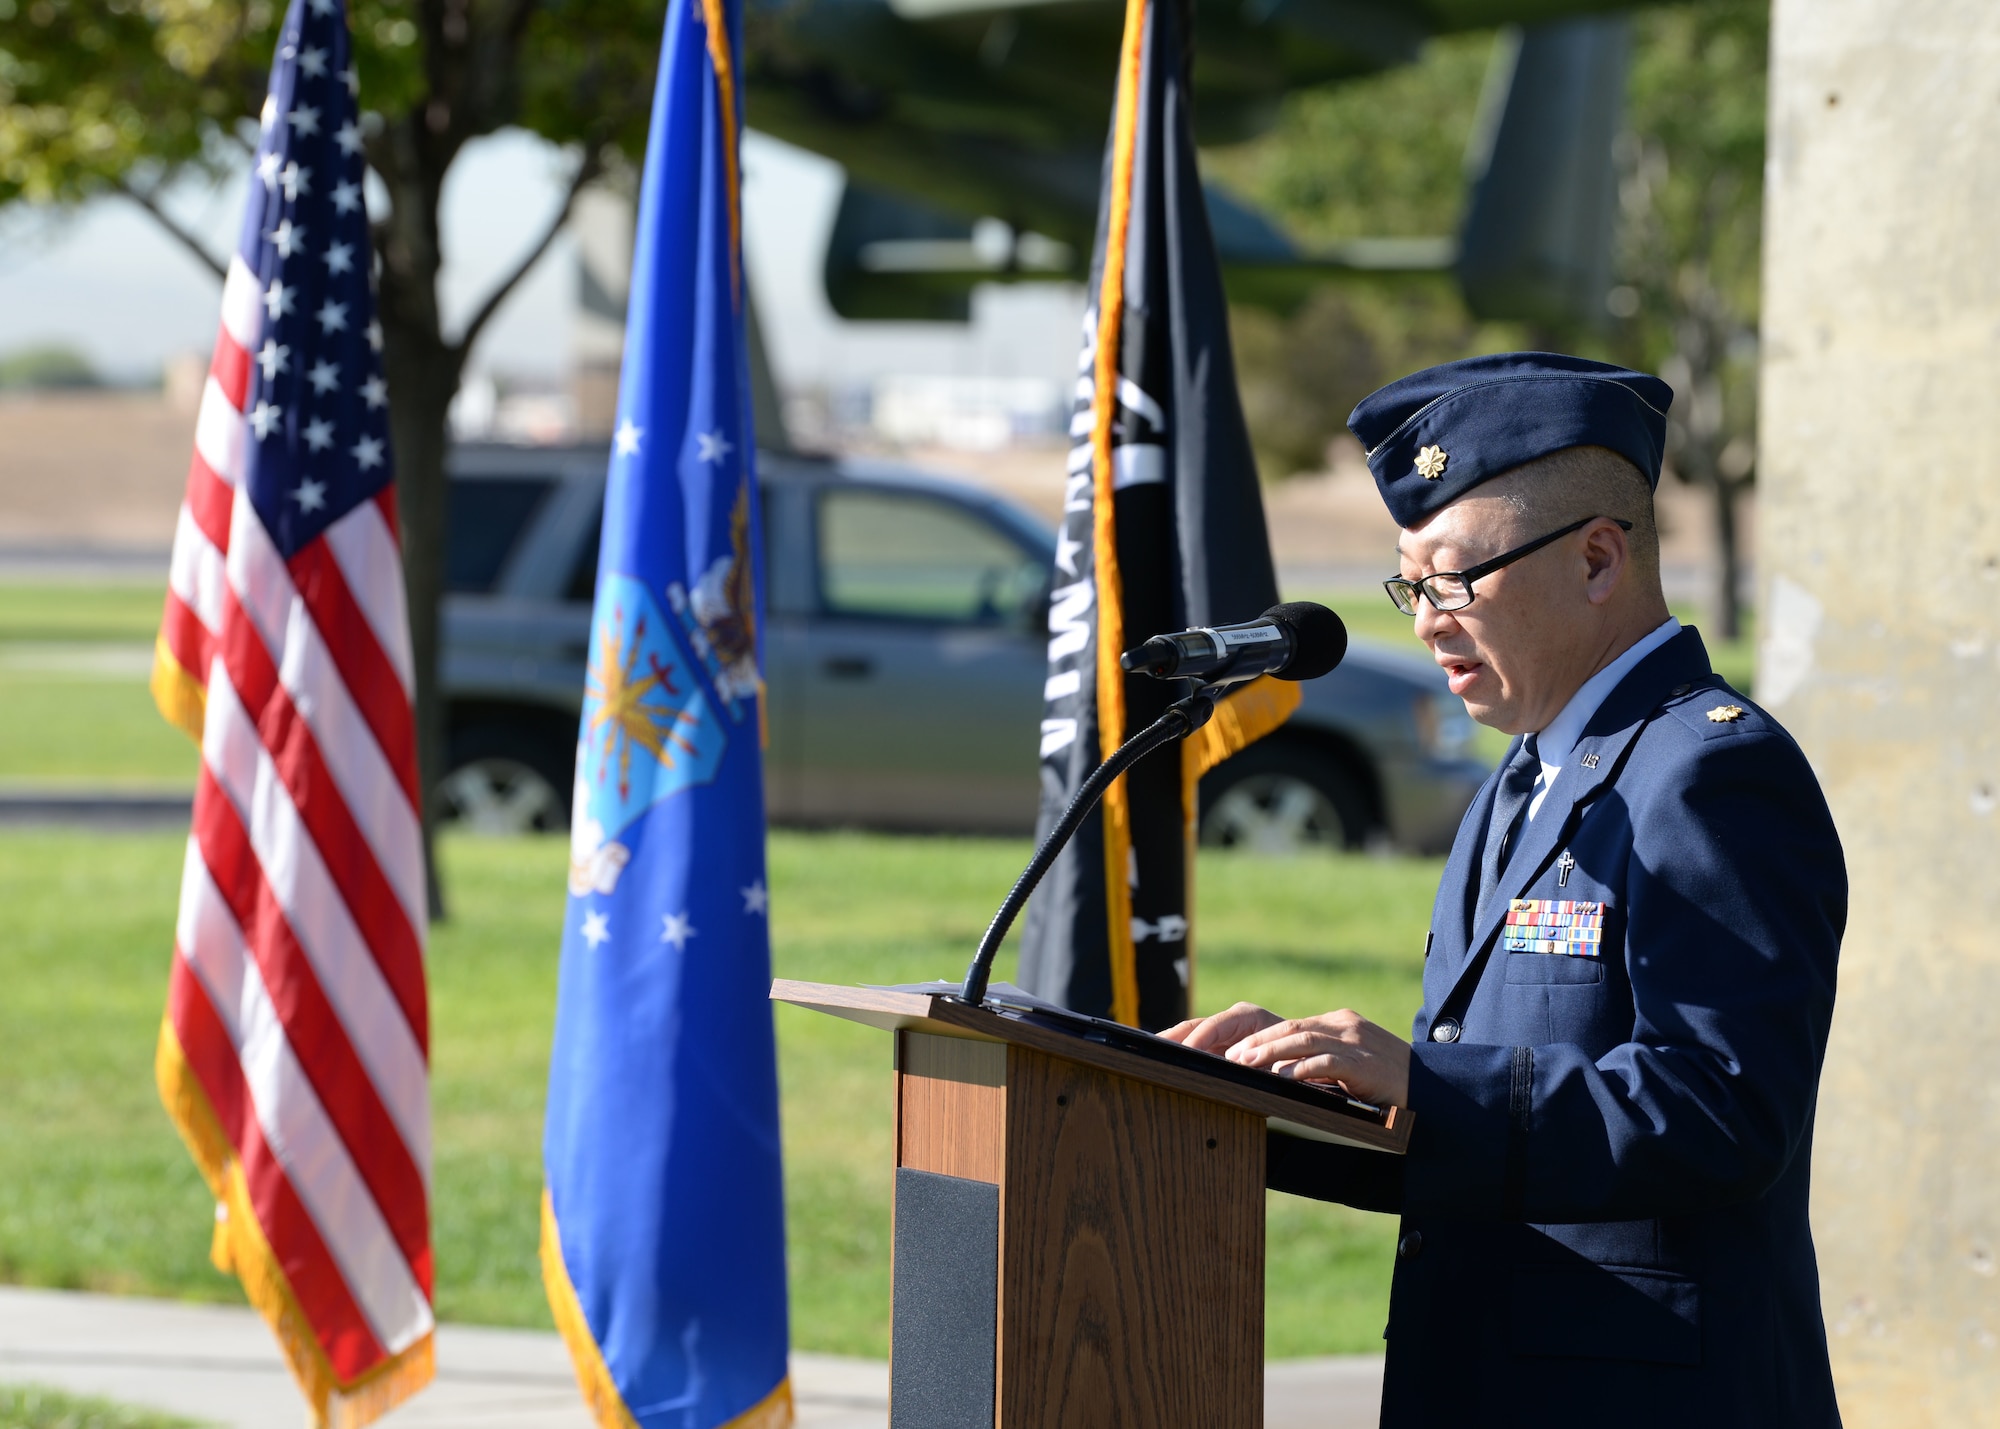 Chaplin (Maj.) Jason Kim, Deputy Wing Chaplin, speaks at the Prisoner of War/Missing in Action ceremony at Freedom Park on Nellis Air Force Base, Nev., Sept. 21, 2018.  Kim commissioned as a chaplain in 2003 so he could help Airmen and their families as they progressed through their Air Force careers. (U.S. Air Force photo by Airman 1st Class Bryan T. Guthrie)